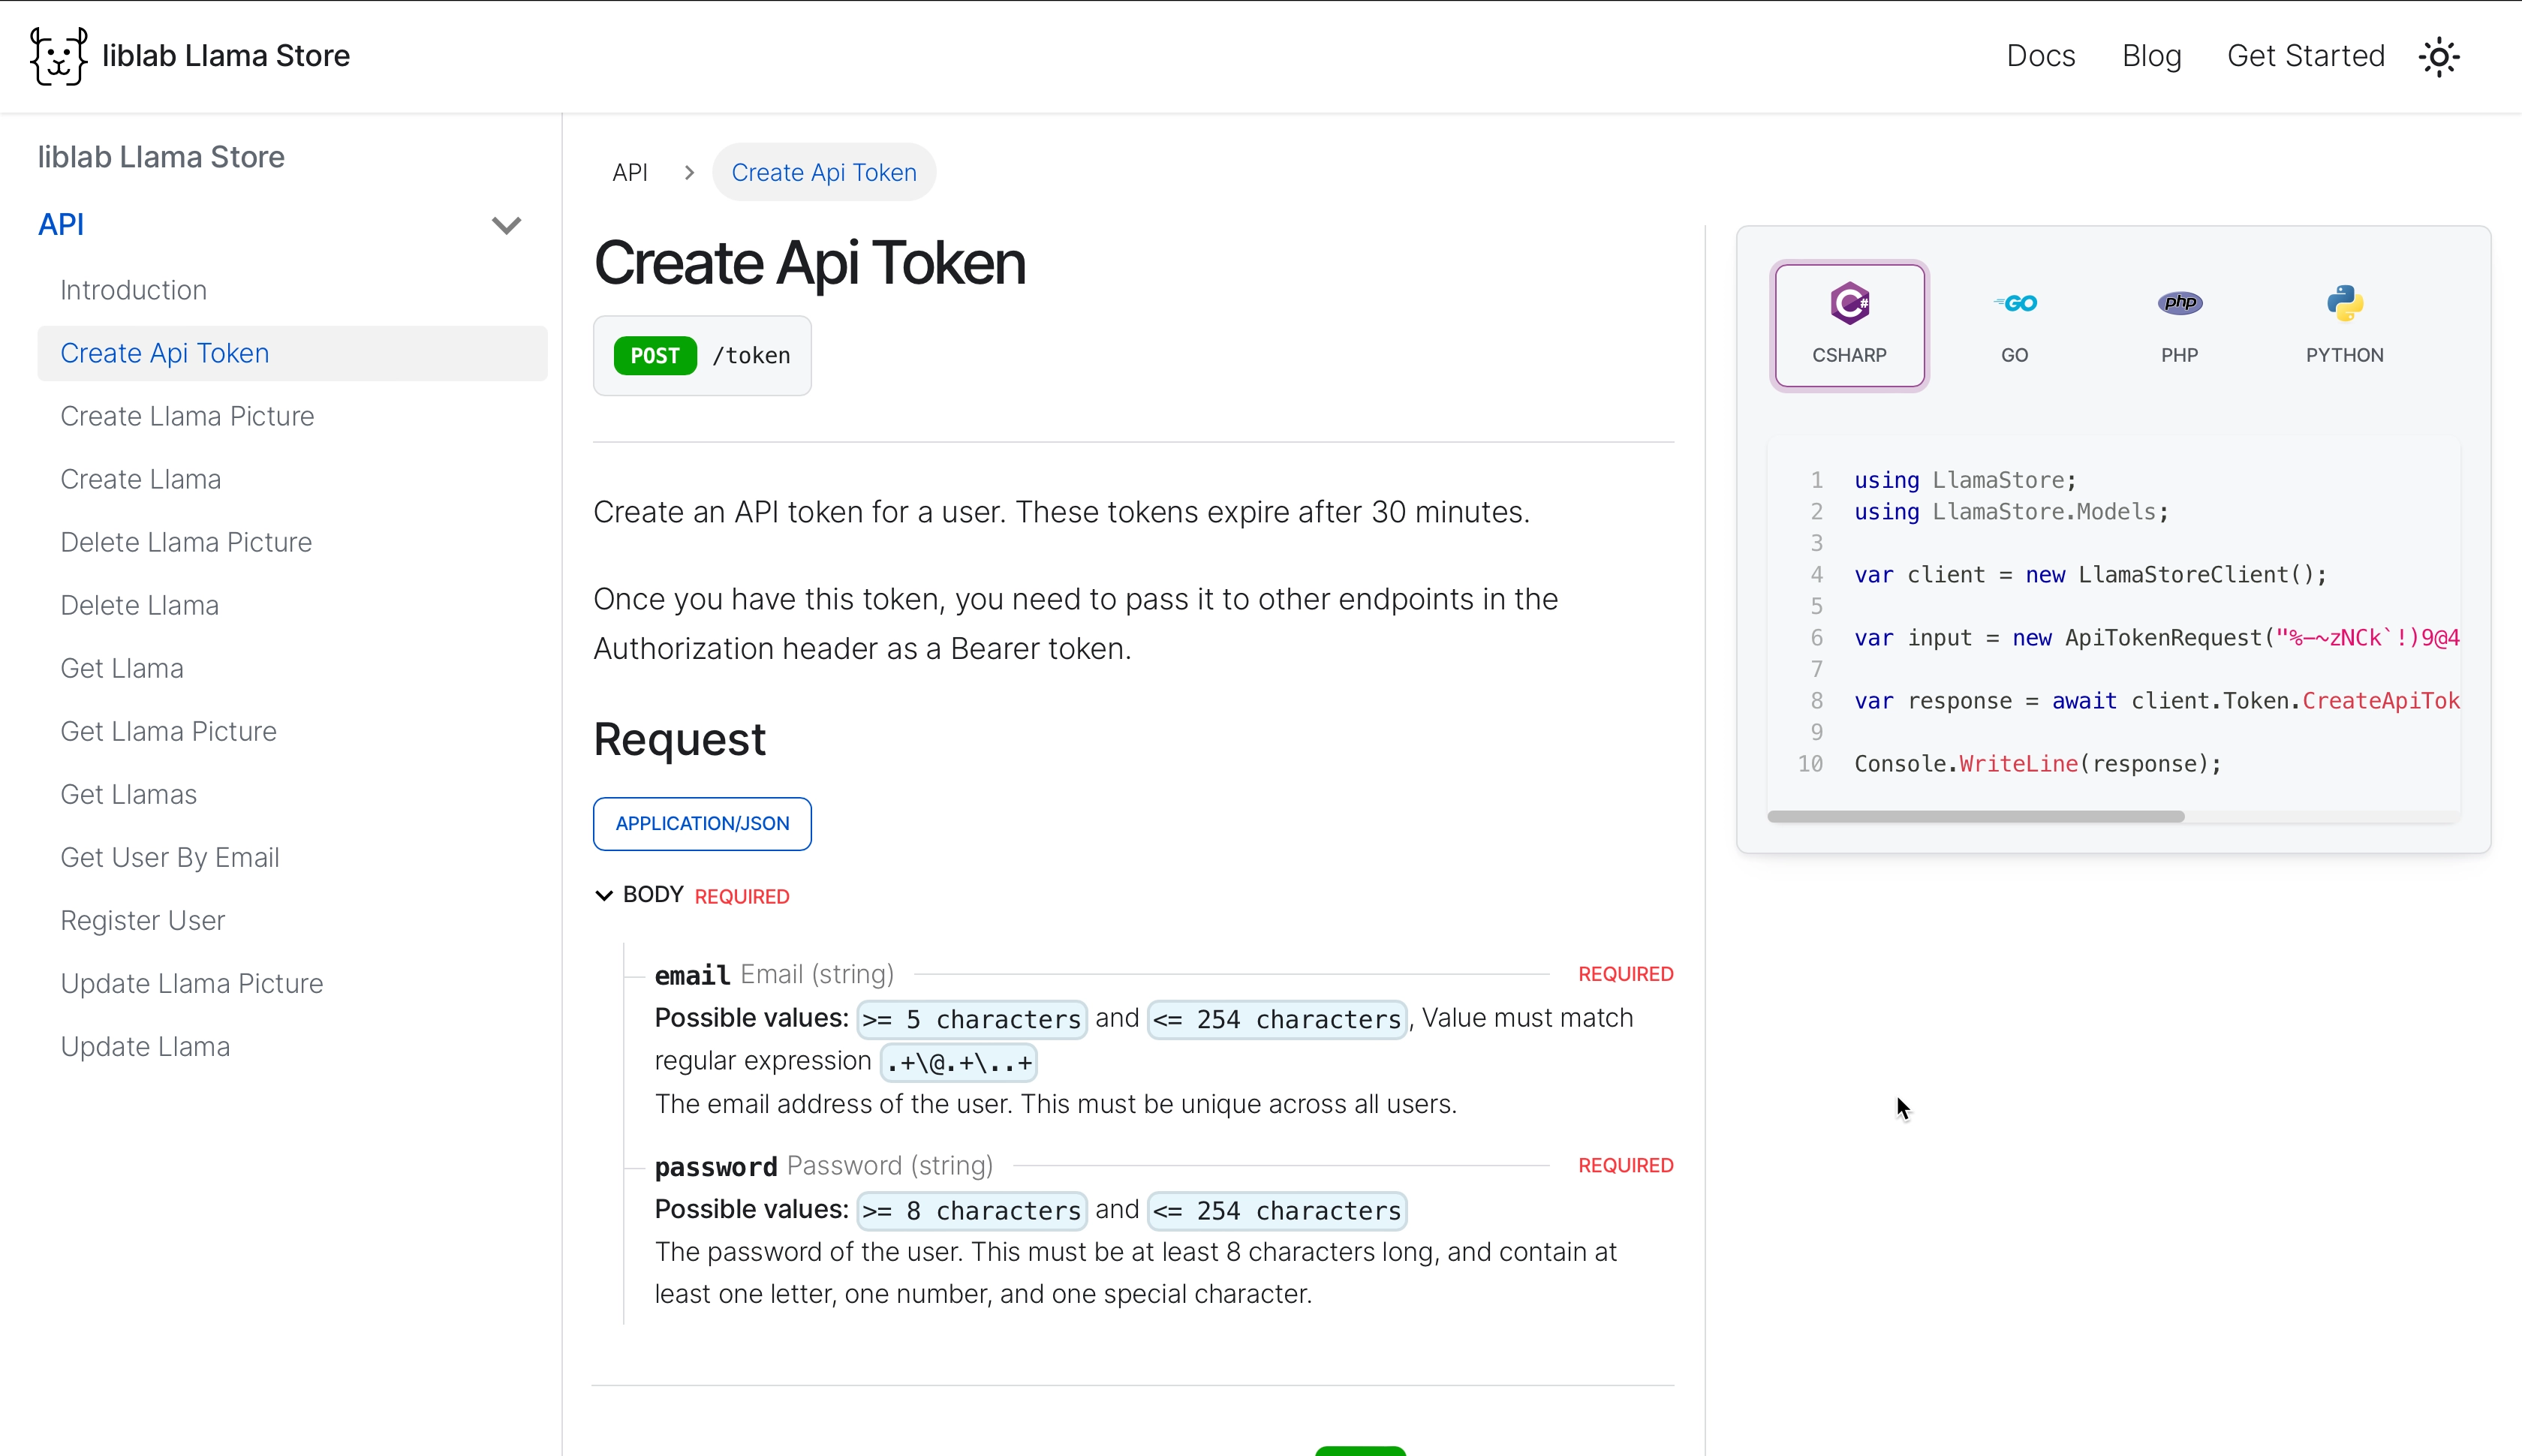 A screenshot of the llama store docs showing the Create API token endpoint and example C# code